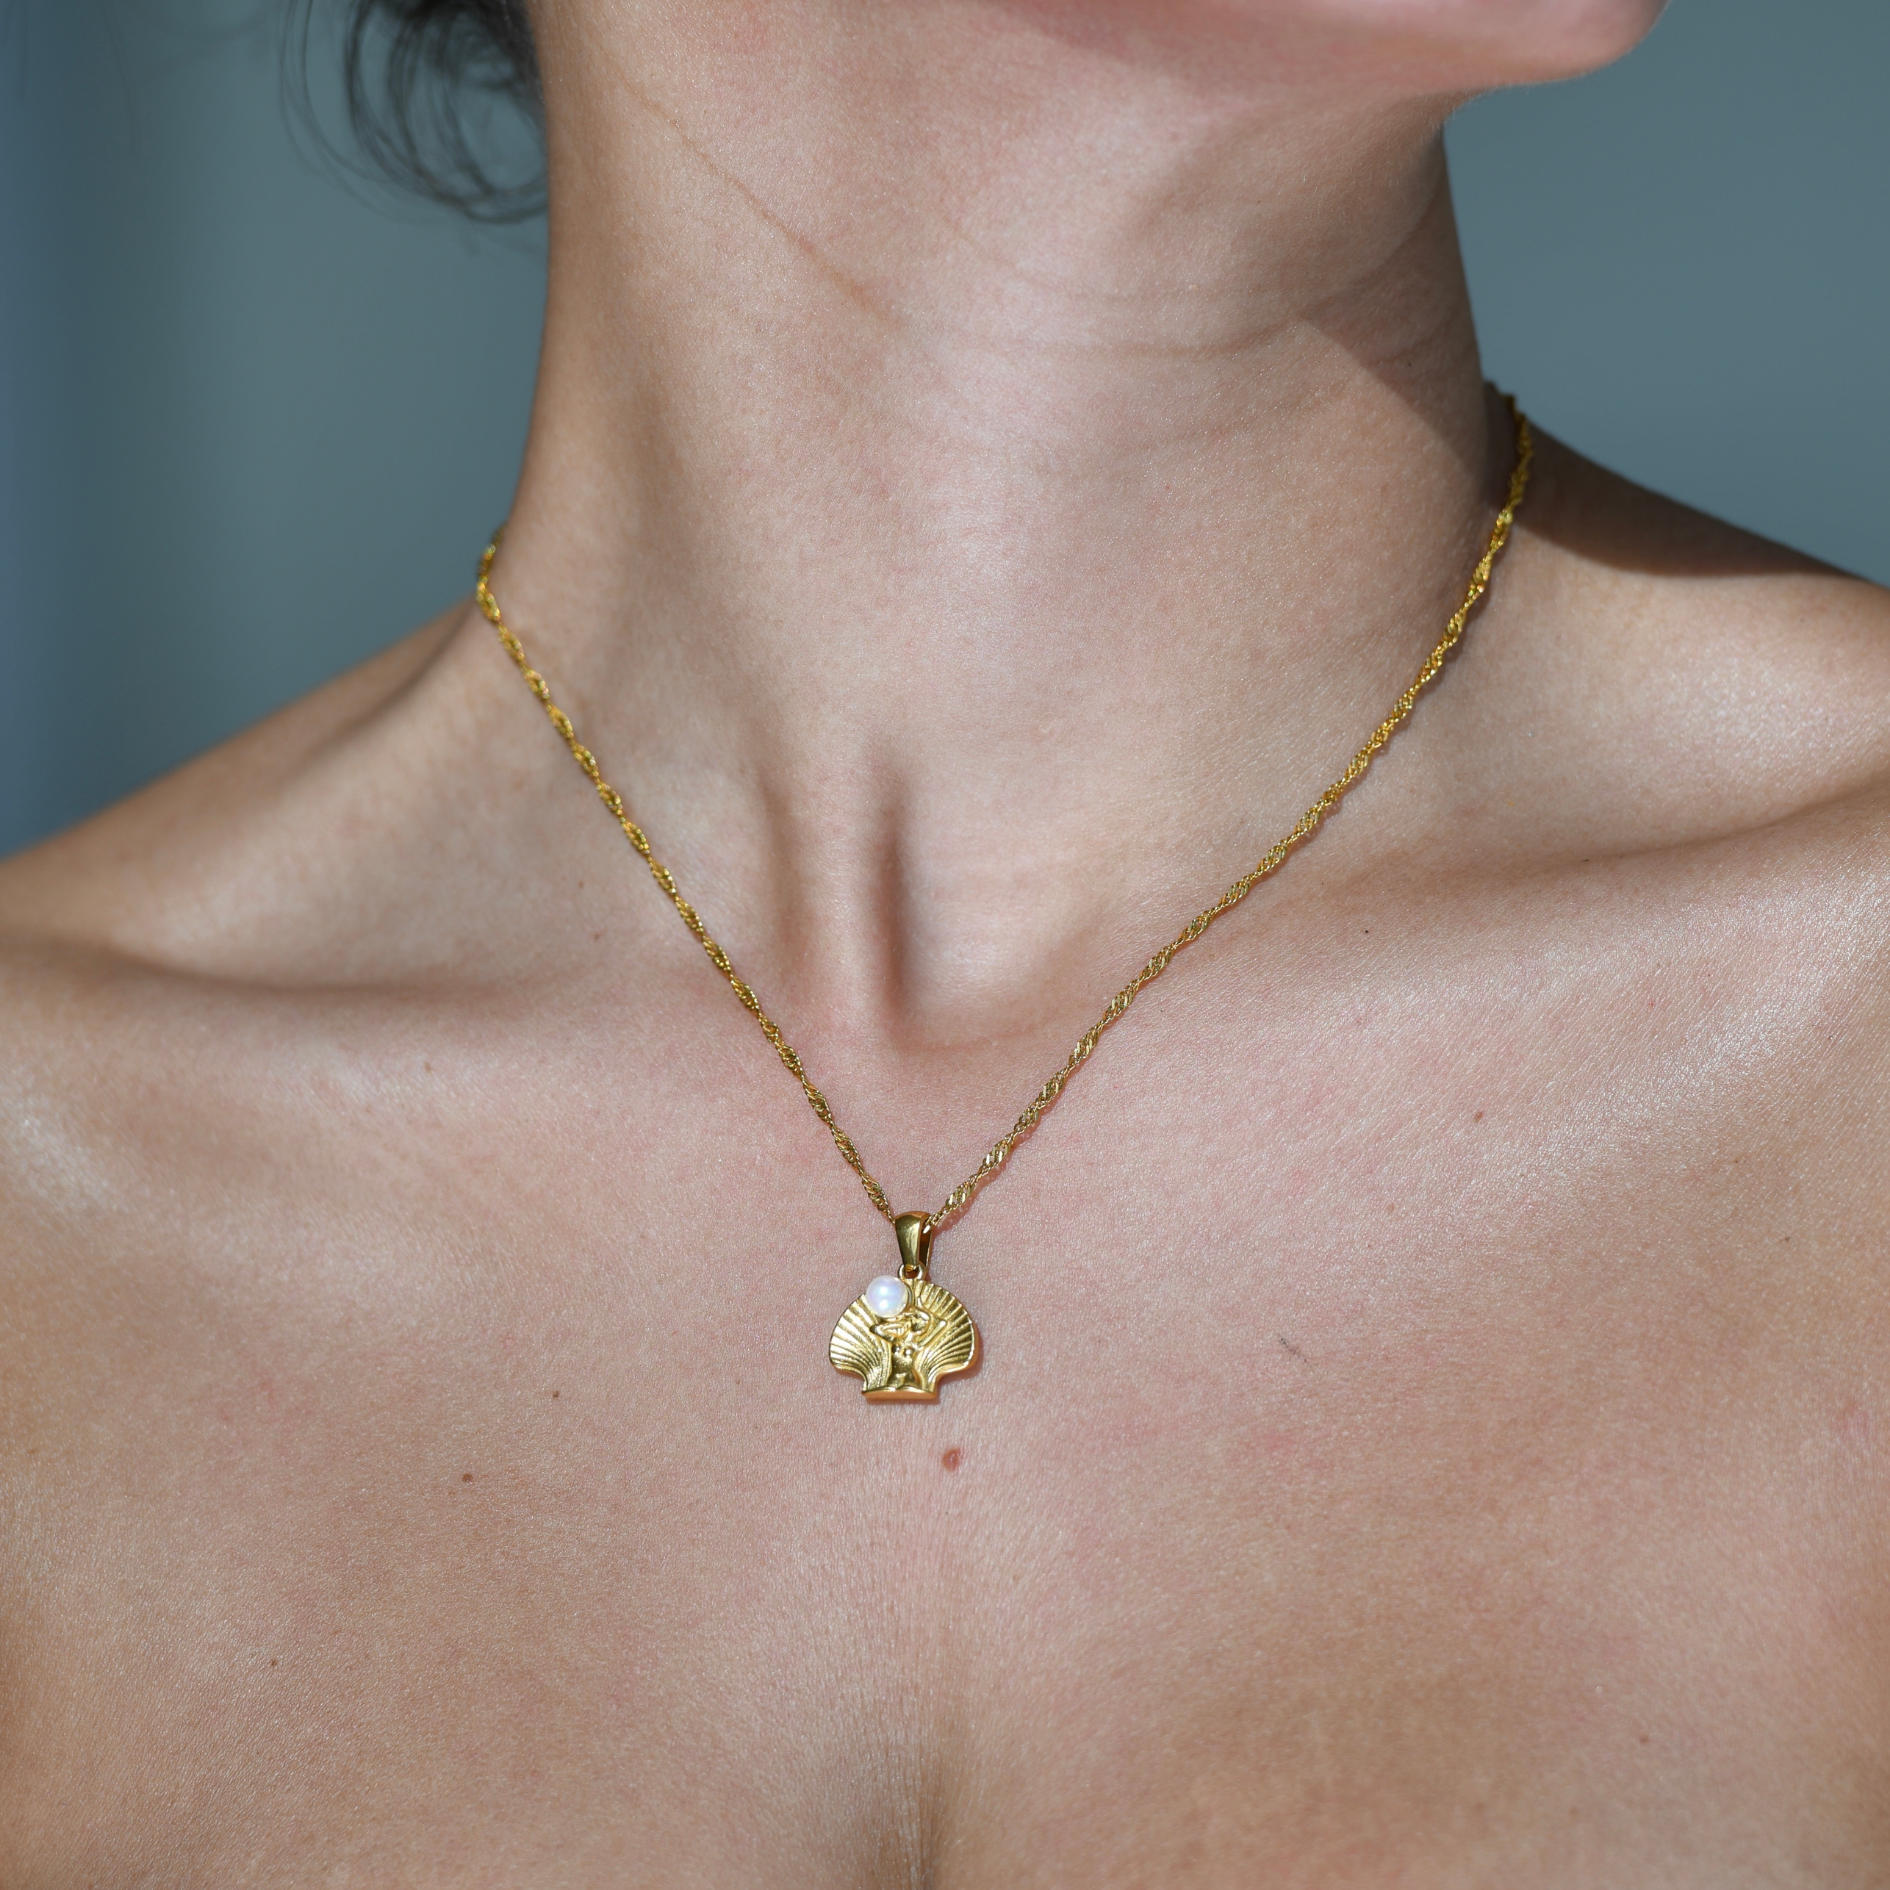 Open Shell Shape pendant with a woman silohuette in the middle holdin a white pearl on her shoulders. Resembling "the birth of venus" Gold plated chain and pendant necklace. Venus shell pendnat gold necklace.